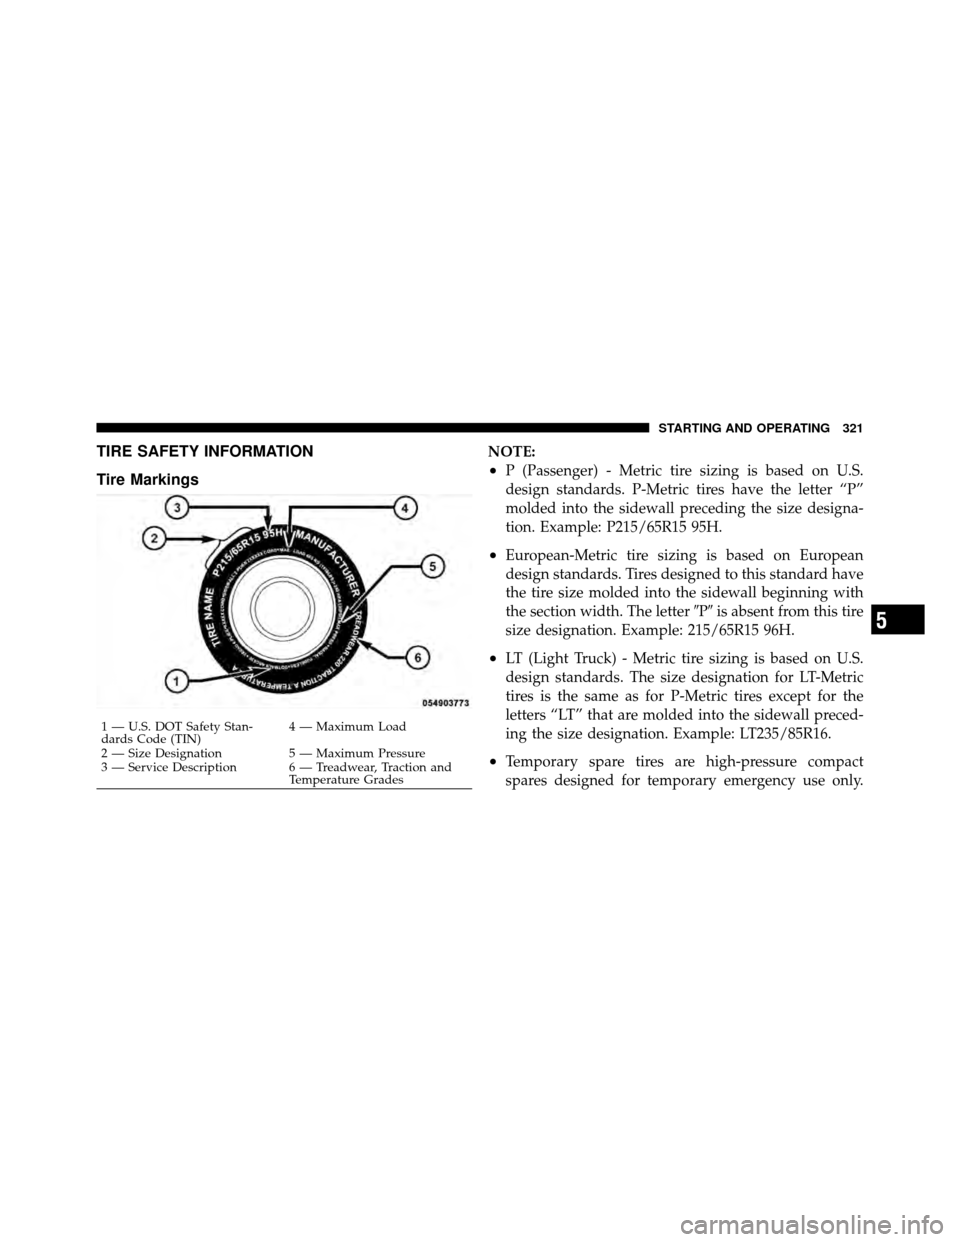 DODGE CALIBER 2010 1.G User Guide TIRE SAFETY INFORMATION
Tire MarkingsNOTE:
•P (Passenger) - Metric tire sizing is based on U.S.
design standards. P-Metric tires have the letter “P”
molded into the sidewall preceding the size d